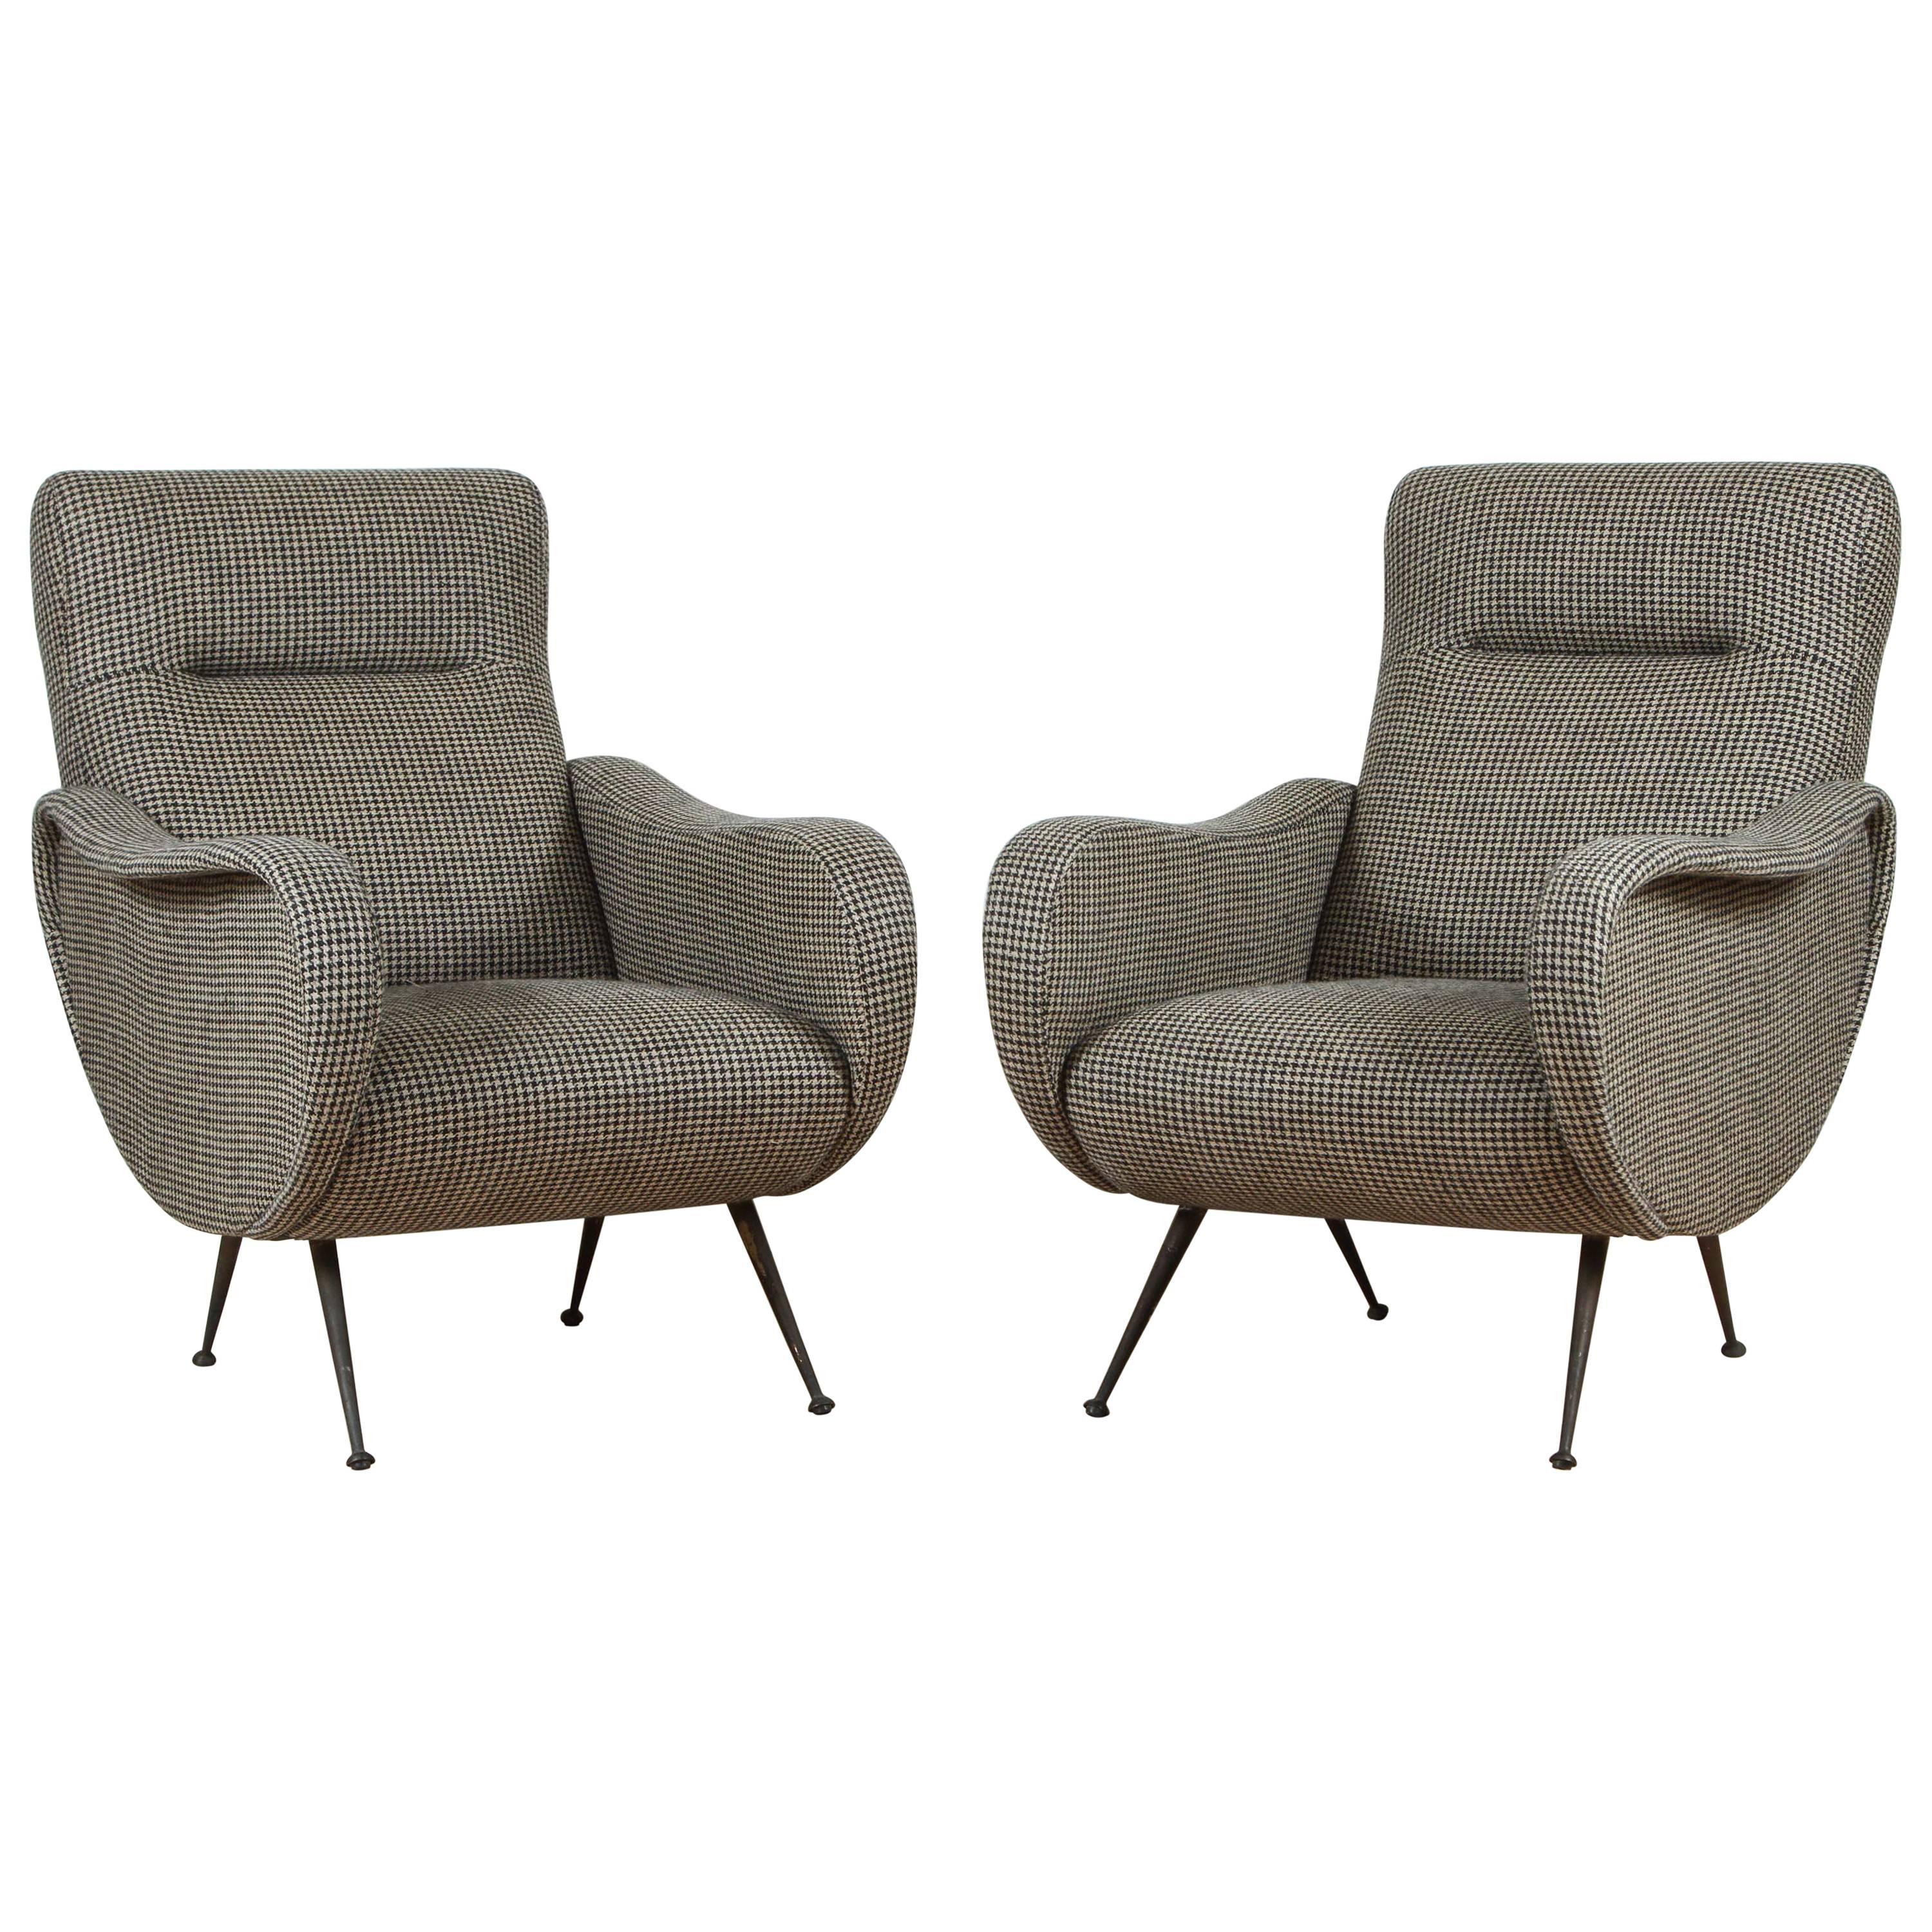 Pair of Italian Lounge Chairs Upholstered in Wool Houndstooth